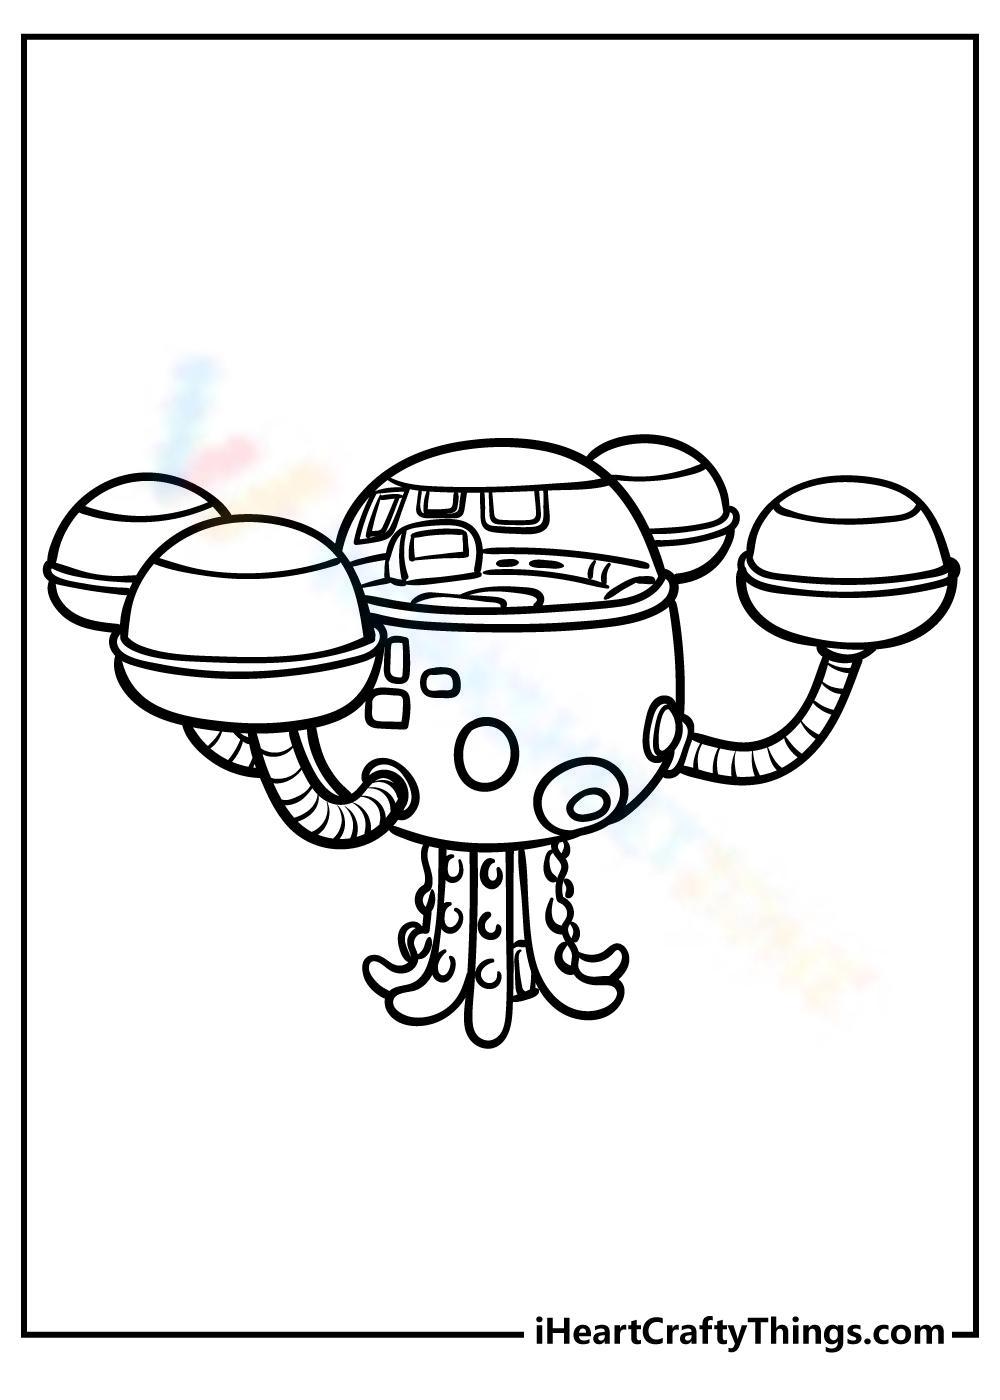 Grade octonauts coloring pages worksheets